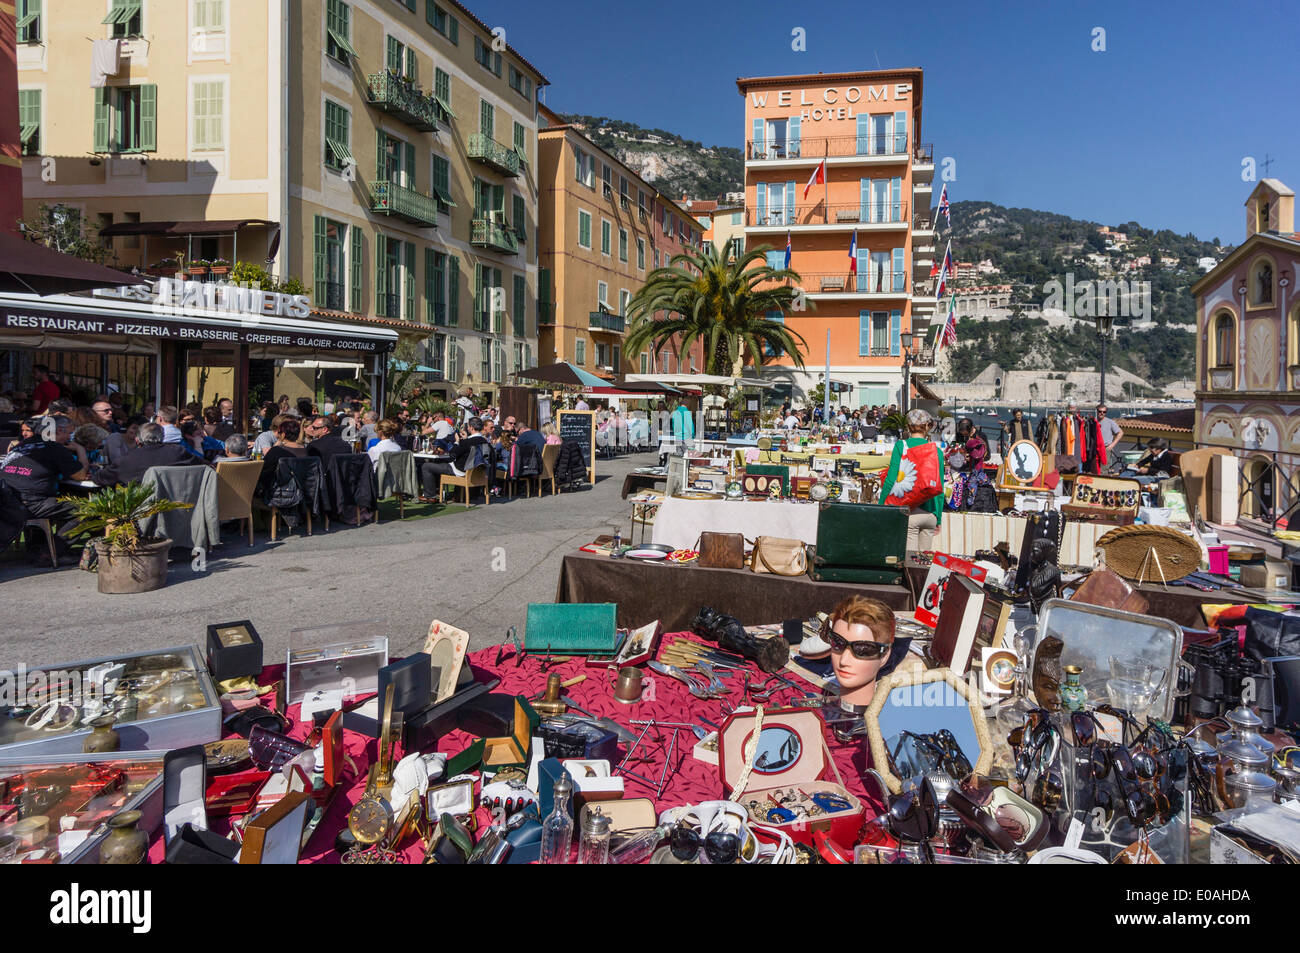 Villefranche Sur Mer, Flea Market, Welcome Hotel, Alpes Maritimes, Provence, French Riviera, Mediterranean, France, Europe,  Stock Photo